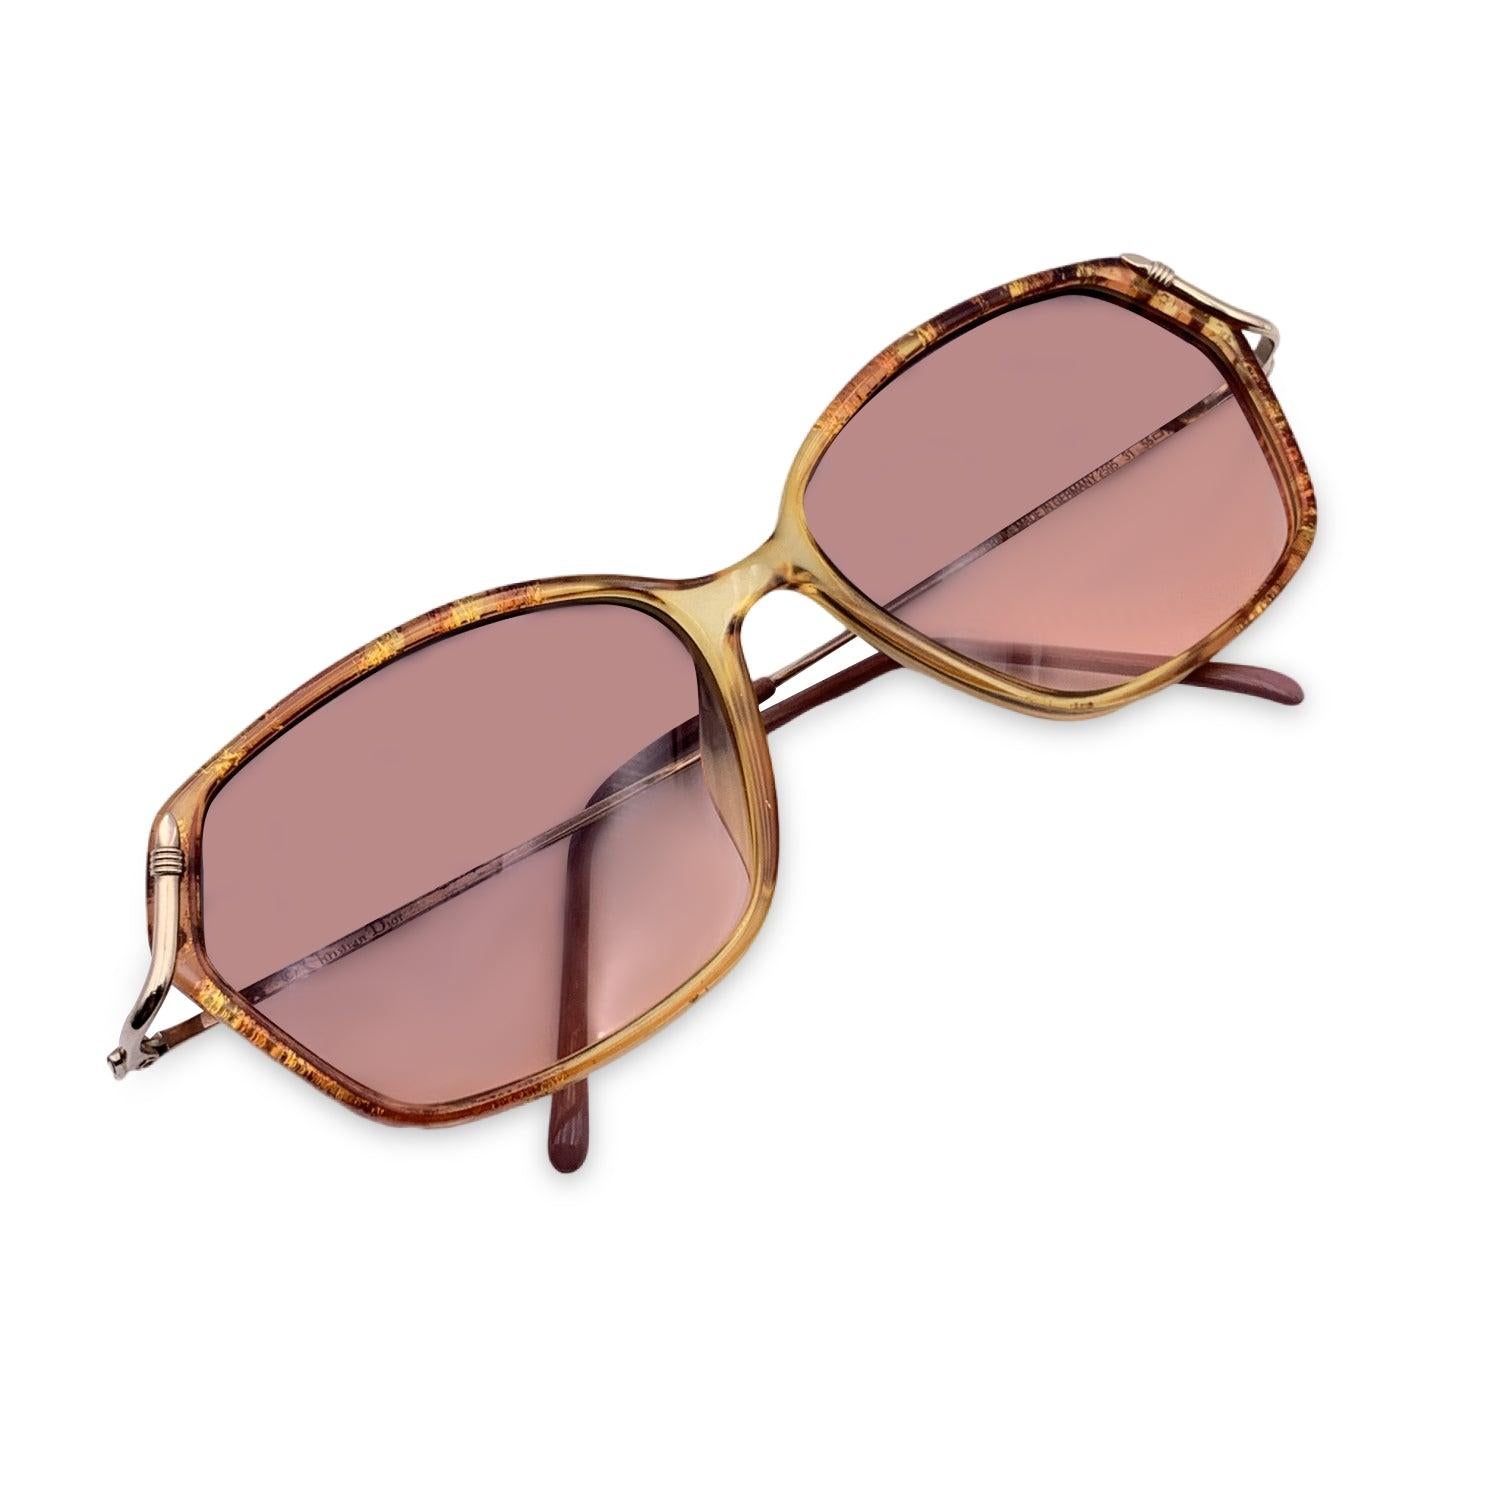 Vintage Christian Dior Sunglasses, Mod. 2595 31 - 55/15 - 125mm. Brownish semi transparent Opyl Frame with gold metal arms. Original 100% Total UVA/UVB protection in gradient lenses. CD logo on temples. Details MATERIAL: Plastic COLOR: Brown MODEL: